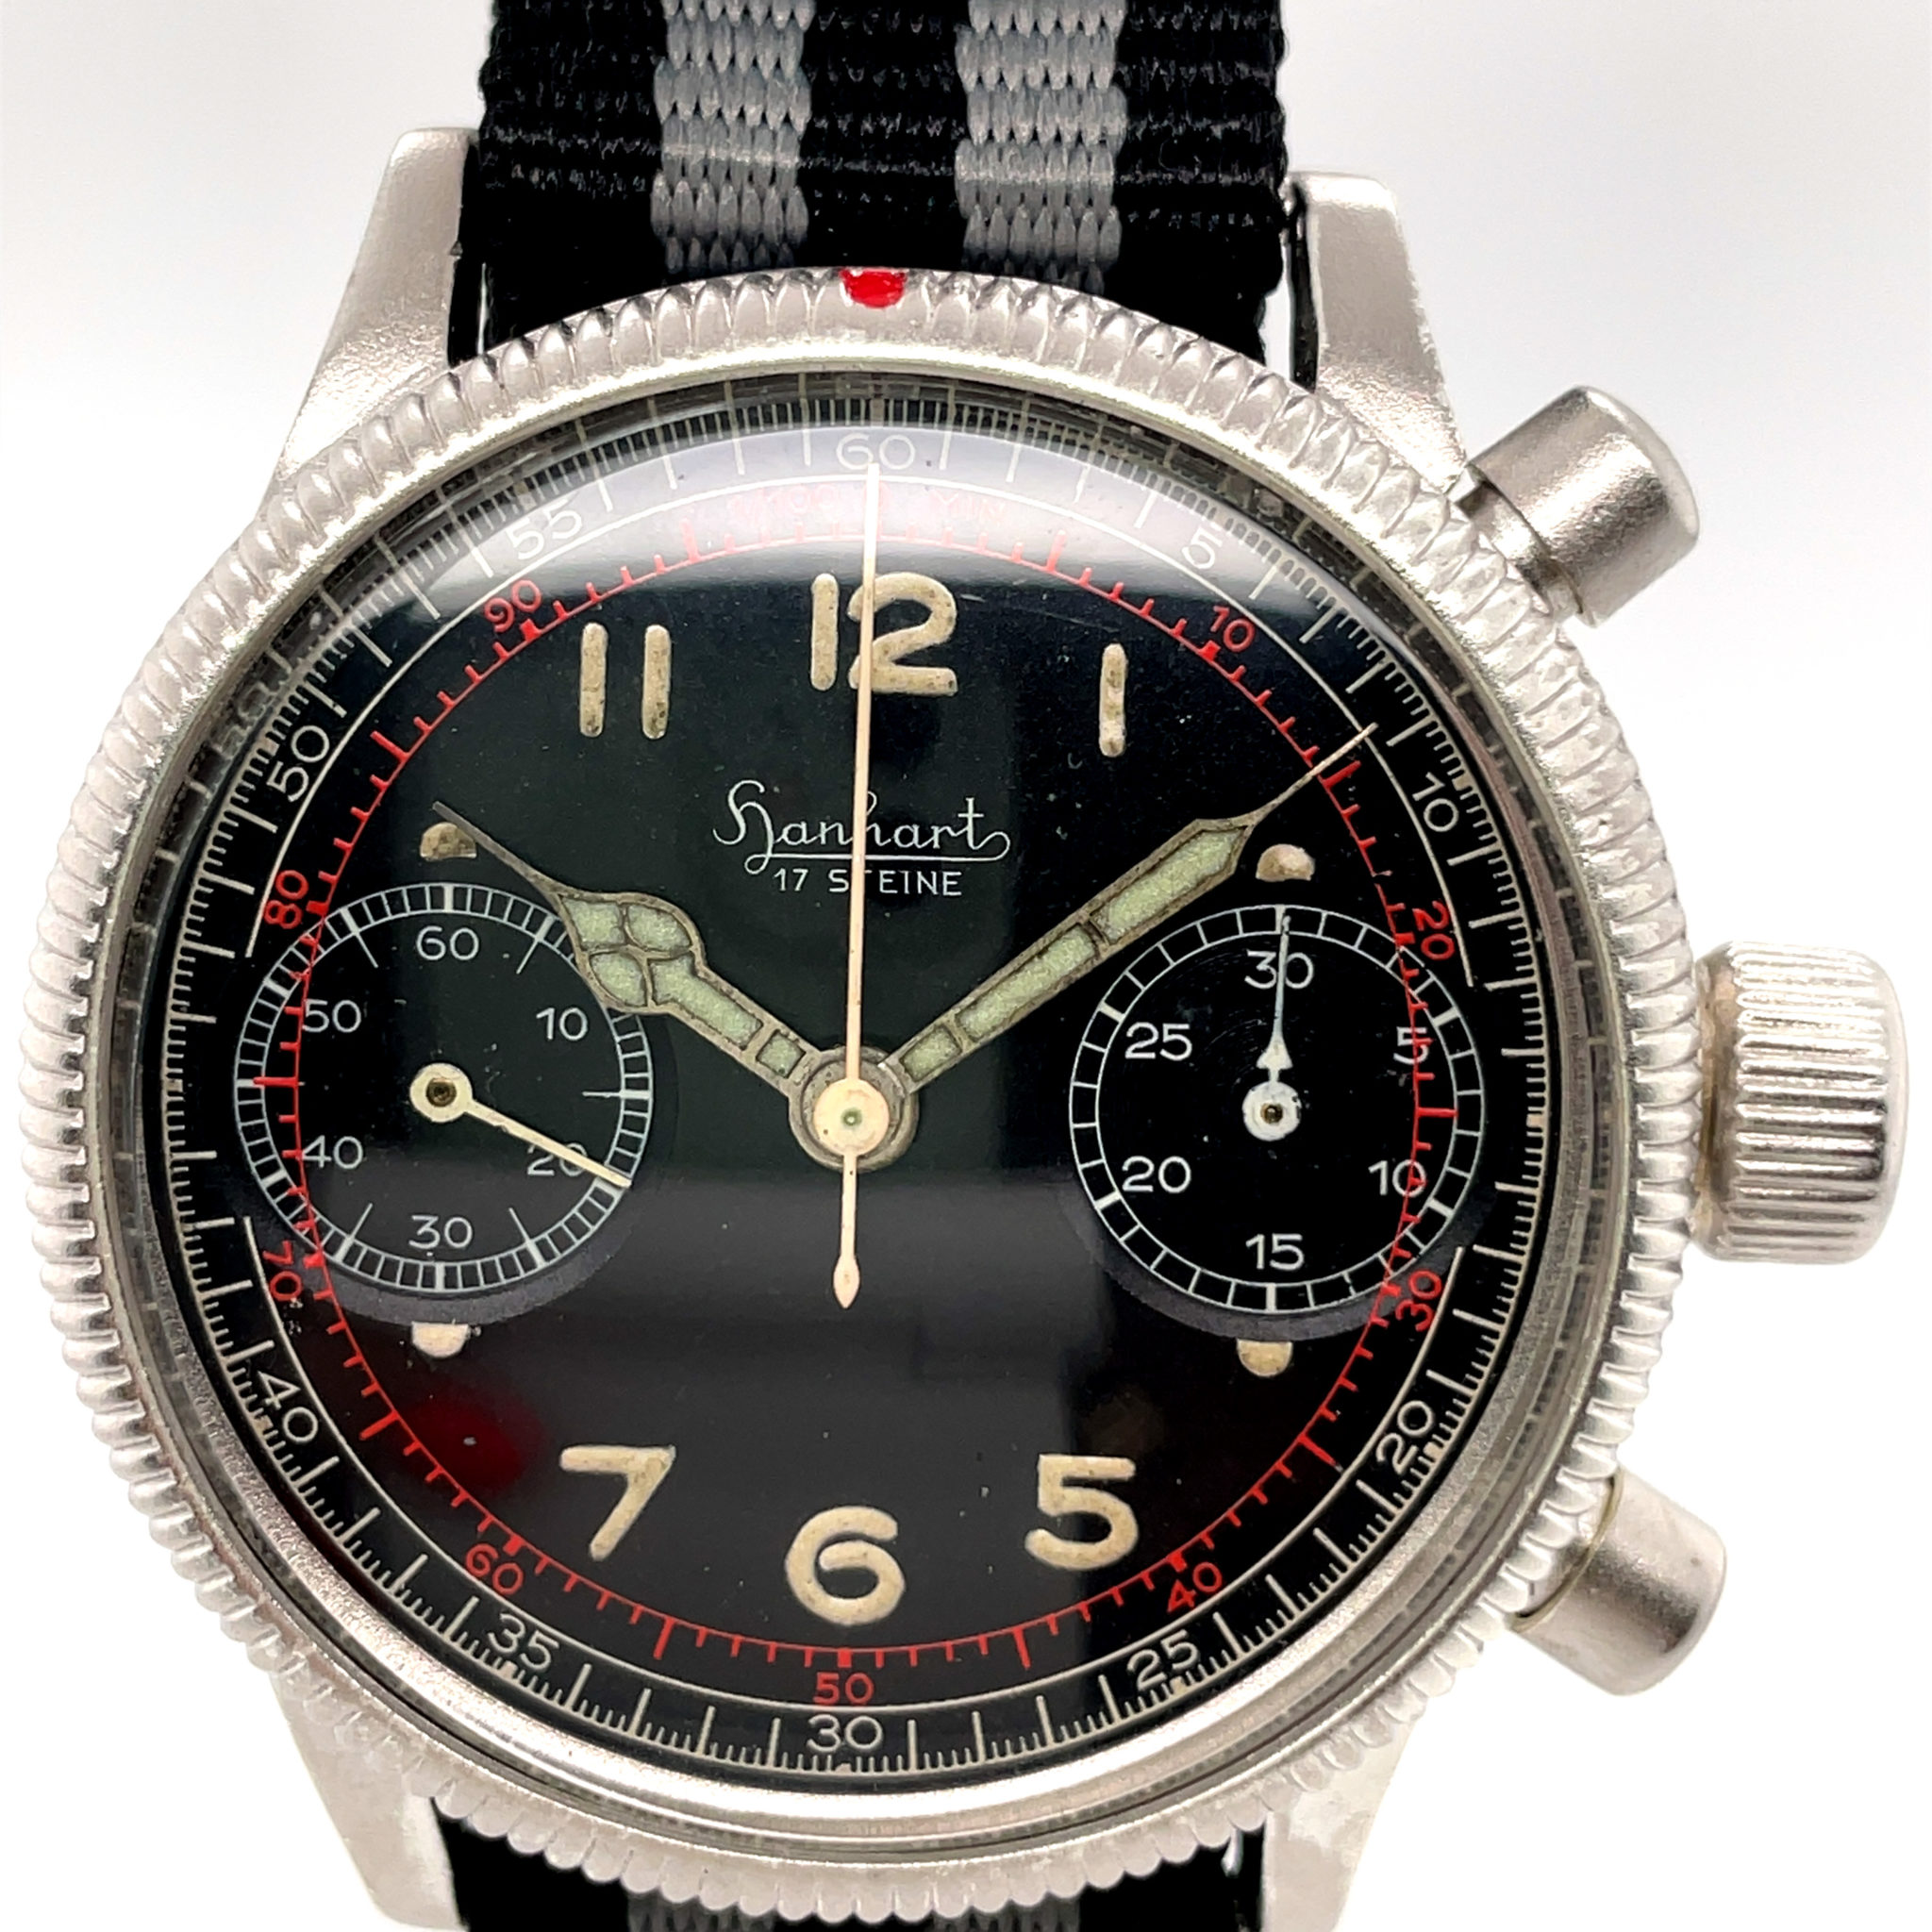 Hanhart Flyback Pilots Vintage Chronograph 1940s WW2, Cal. 41 Full Serviced